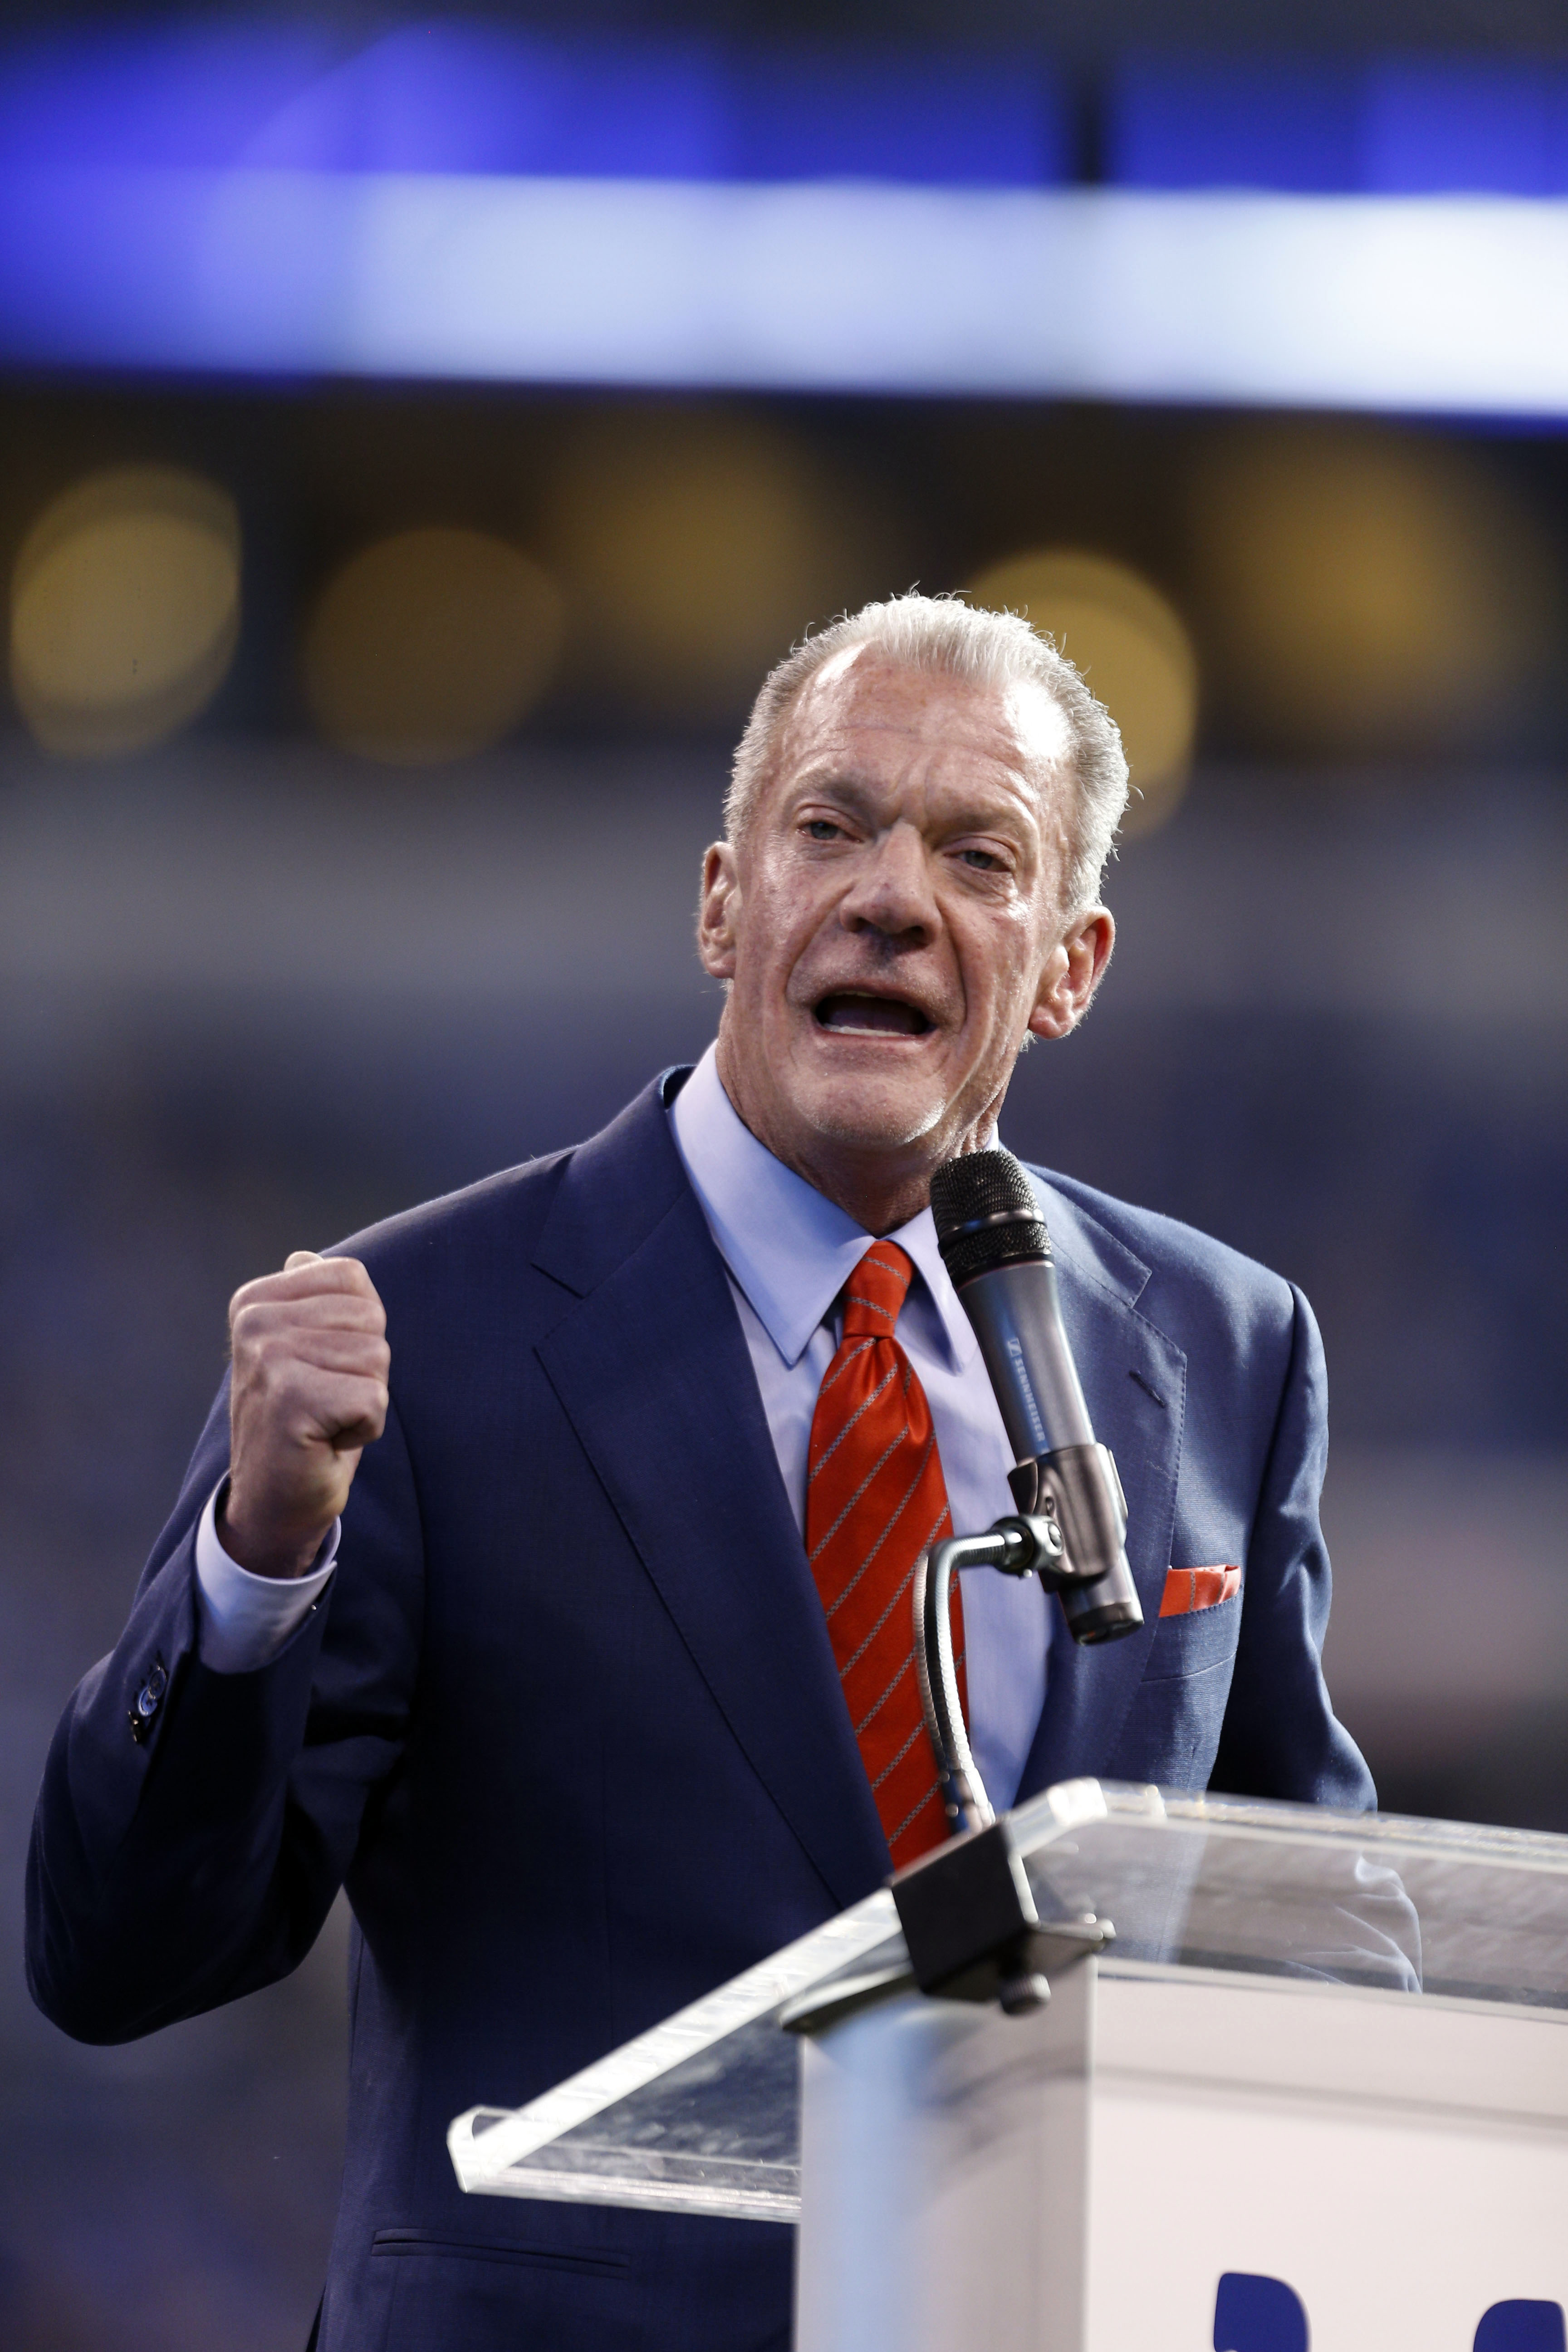 Jan 1, 2017; Indianapolis, IN, USA; Indianapolis Colts owner Jim Irsay inducts former president Bill Polian into the Colts Ring of Honor during halftime of the game against the Jacksonville Jaguars at Lucas Oil Stadium. Mandatory Credit: Brian Spurlock-USA TODAY Sports